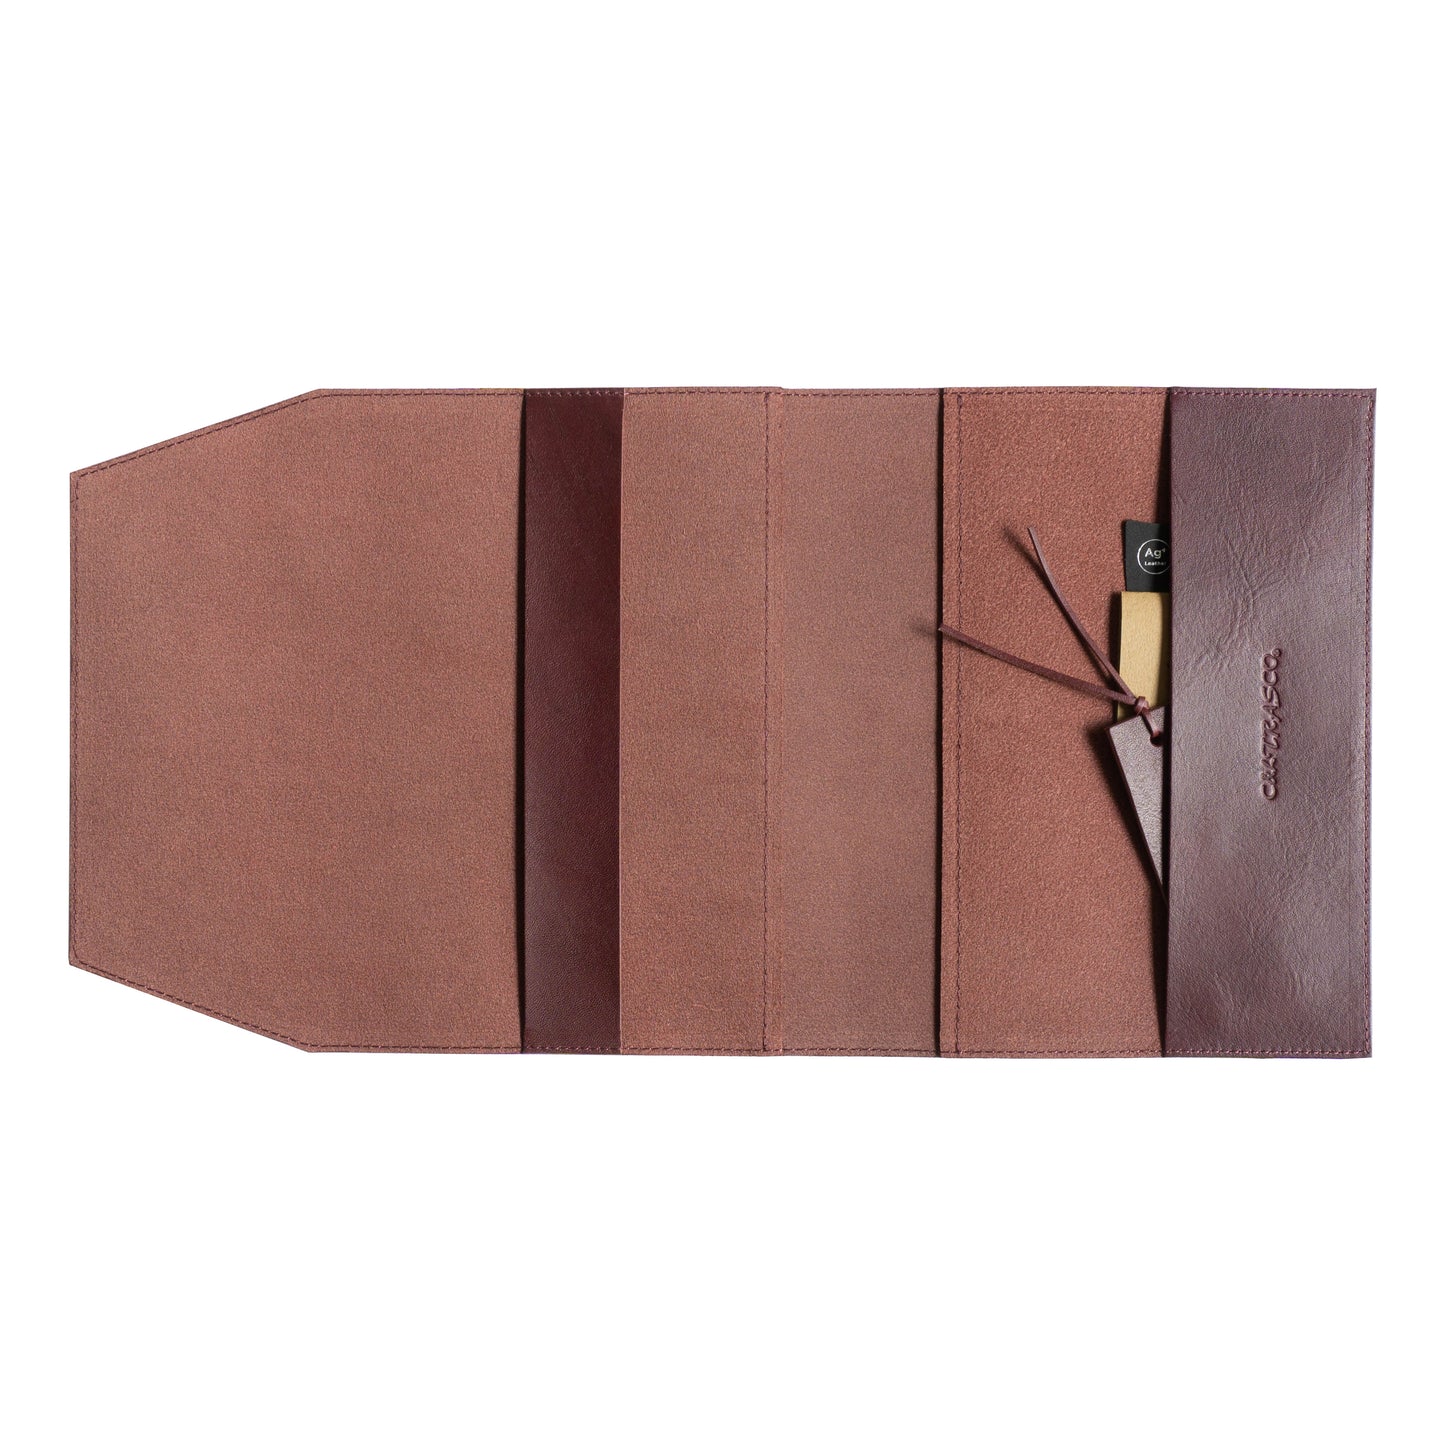 [Japanese Craftsman Made / Classic] Book cover 46 size / 46 size hard cover Genuine leather /with bookmark